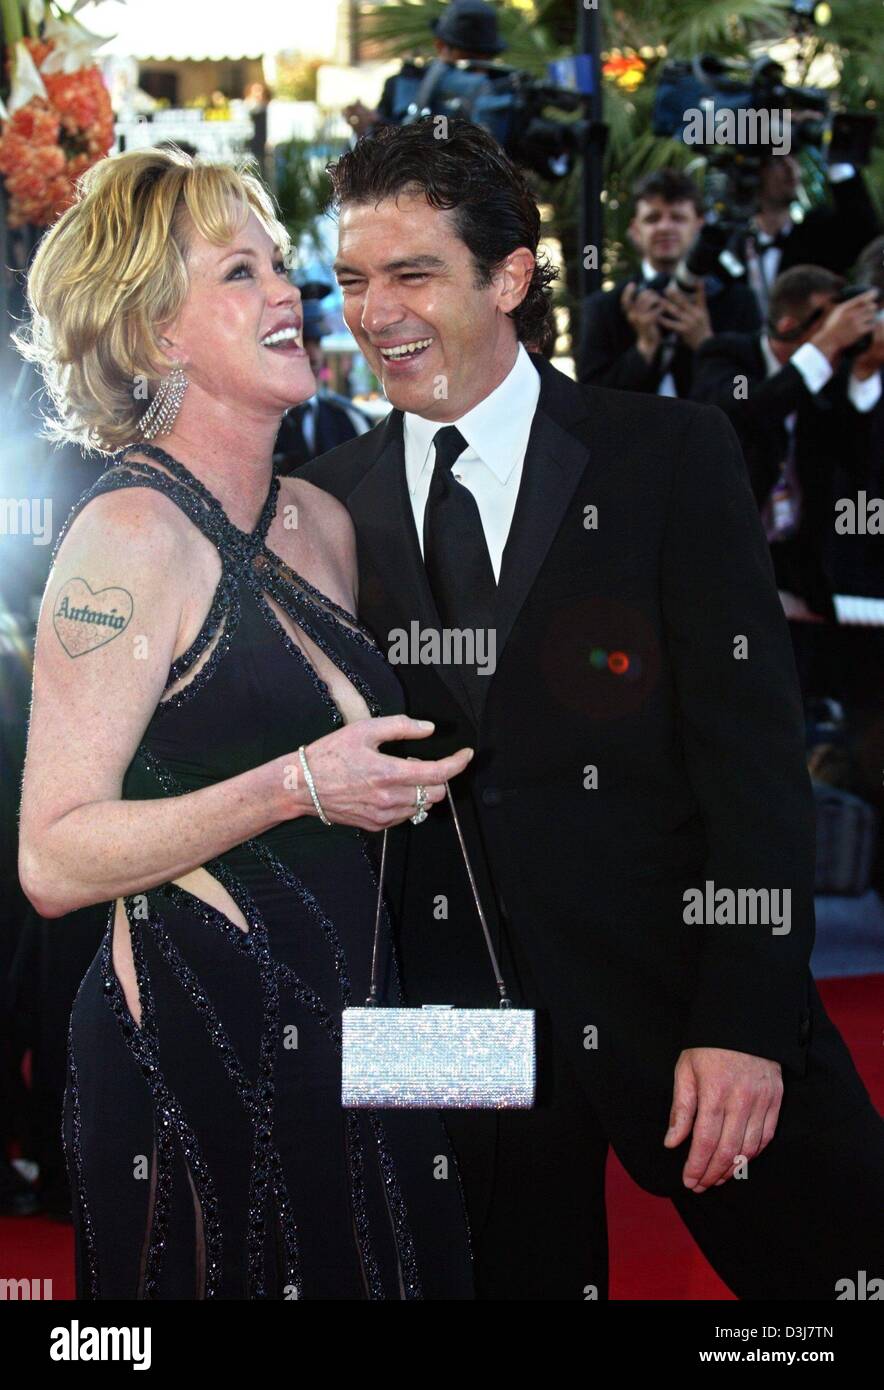 (dpa) - Hollywood couple Antonio Banderas and Melanie Griffith pose ahead of the screening of the animated movie 'Shrek 2' during the 57th Film Festival in Cannes, France, 15 May 2004. Antonio Banderas is the voice of 'Puss-in-Boots' in the second film with the green monster. 'Shrek 2' runs in competition for the Golden Palm award. Stock Photo